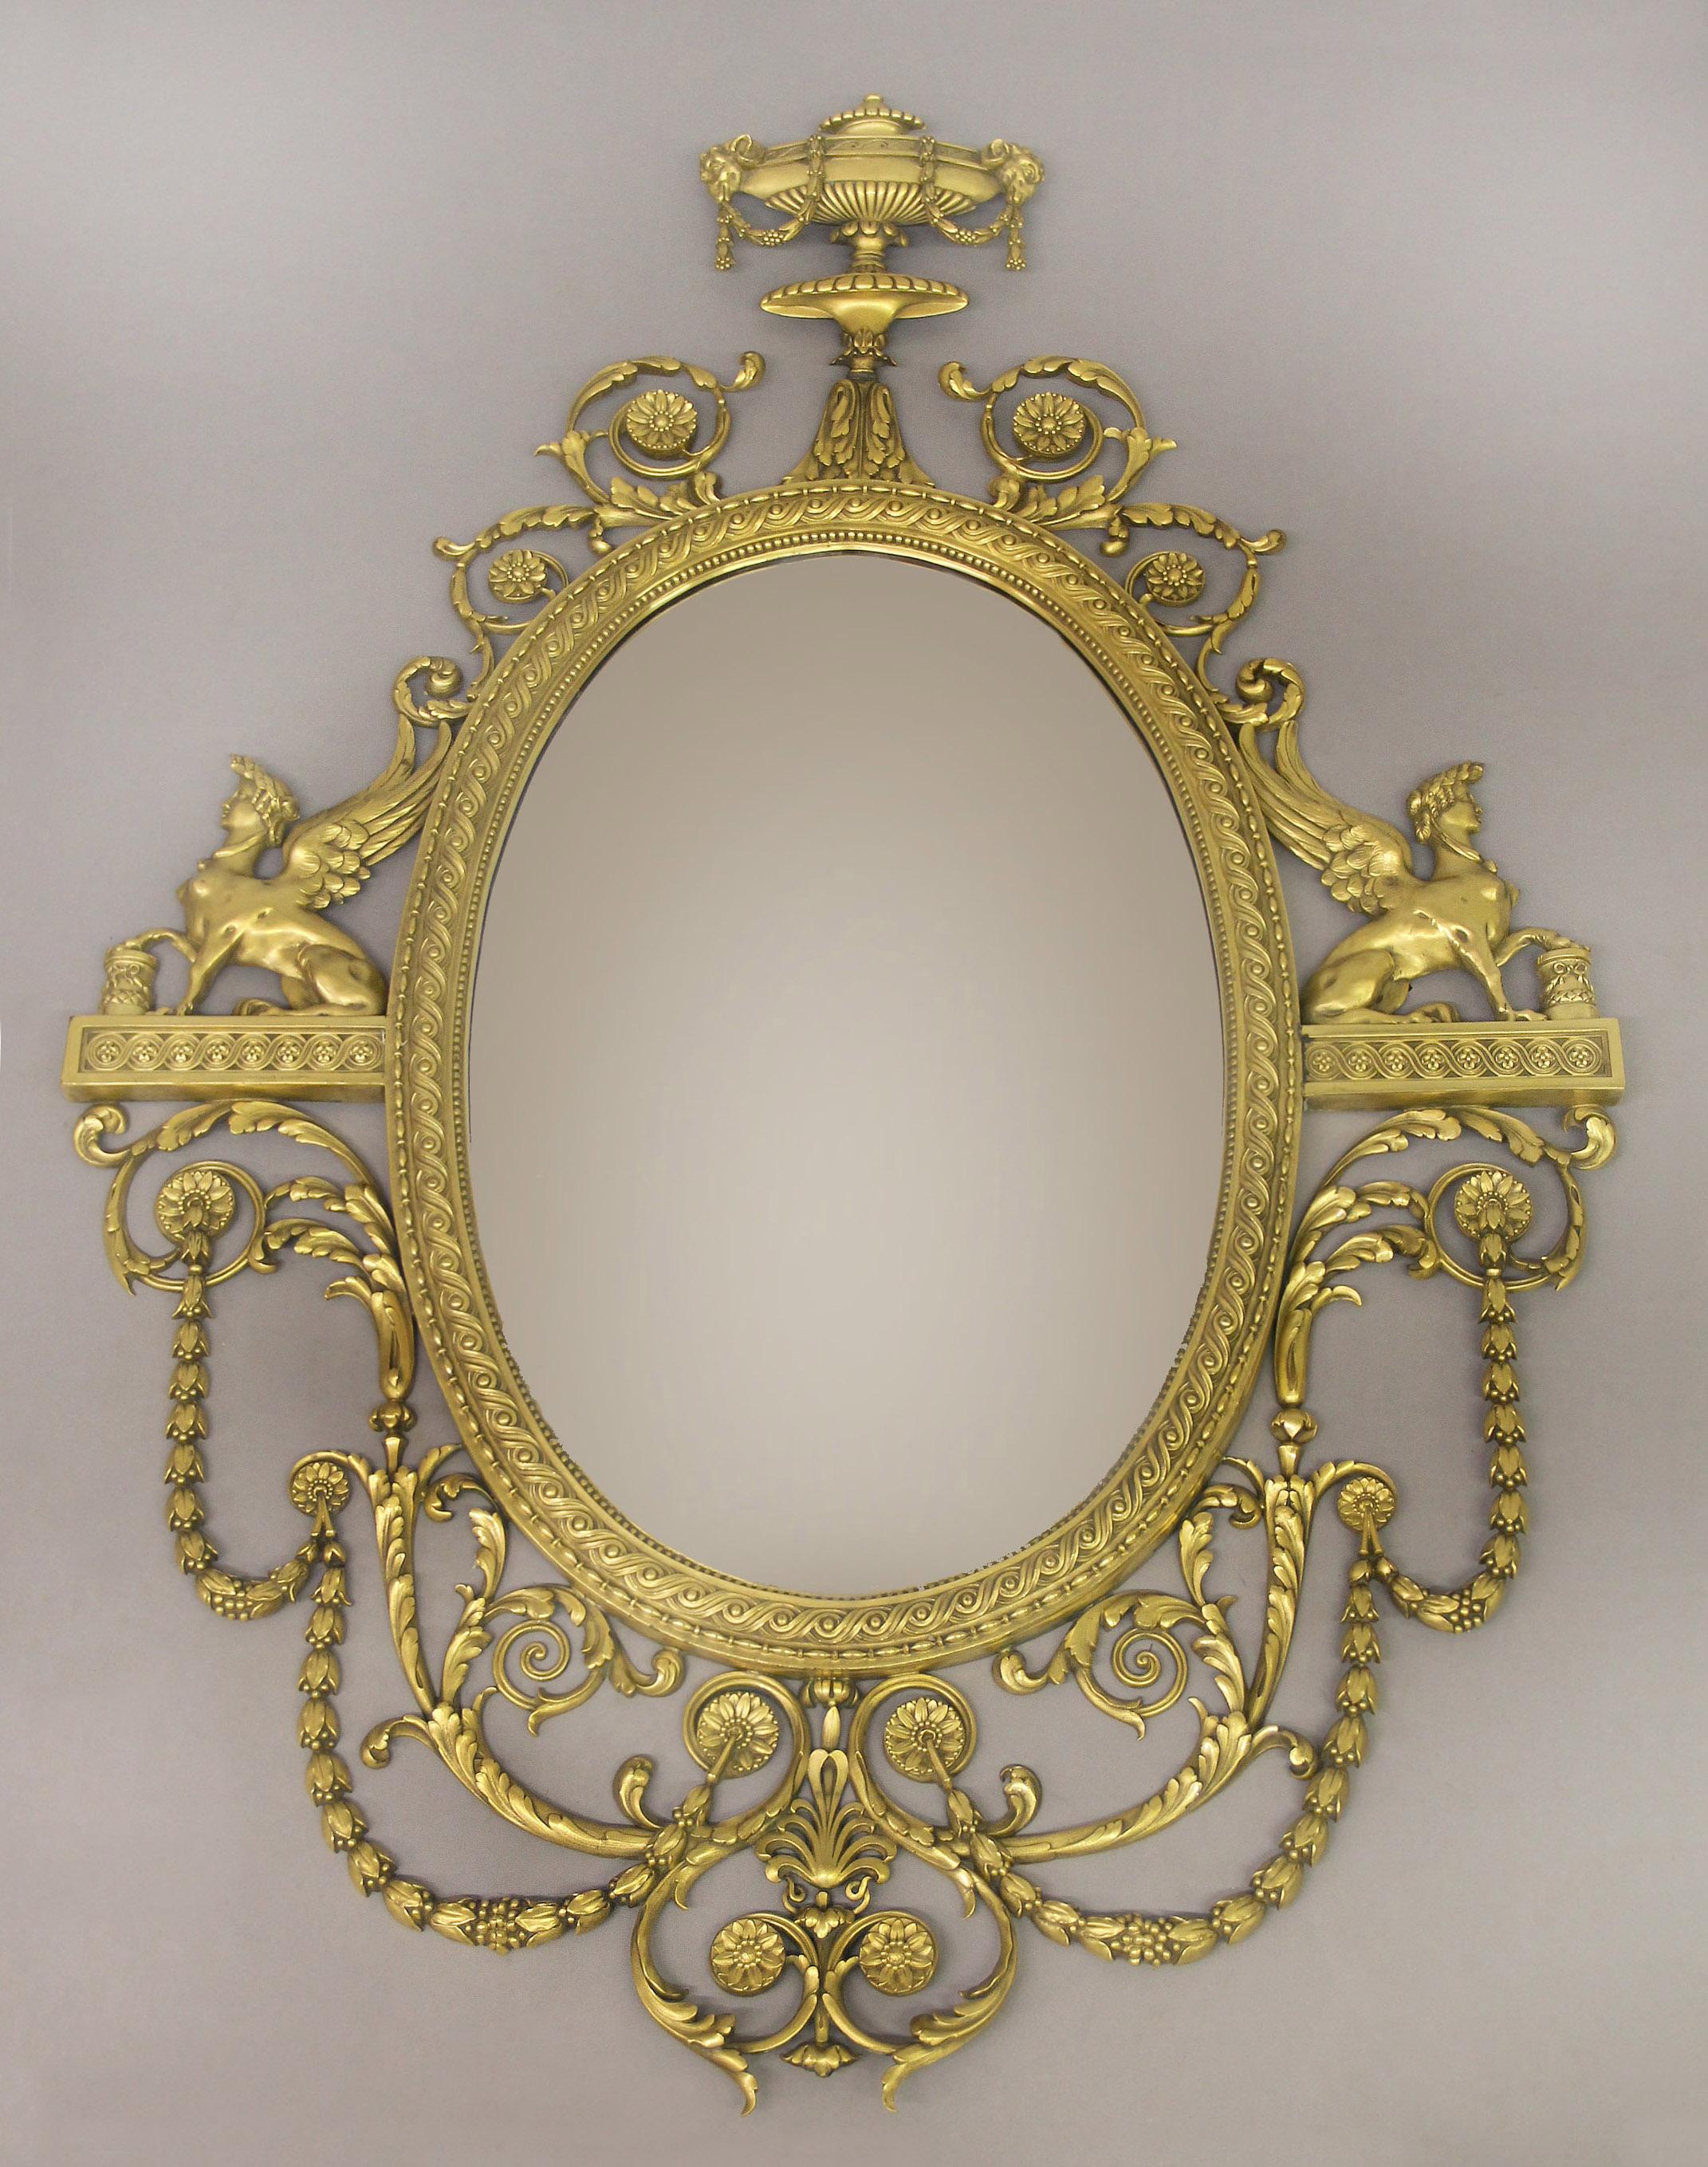 An excellent quality early 20th century gilt bronze mirror by Caldwell

Edward F. Caldwell and Co. Inc. New York

The oval mirror within a guilloche and beaded frame, surmounted by an urn with rams heads draped with husk-festoons and above